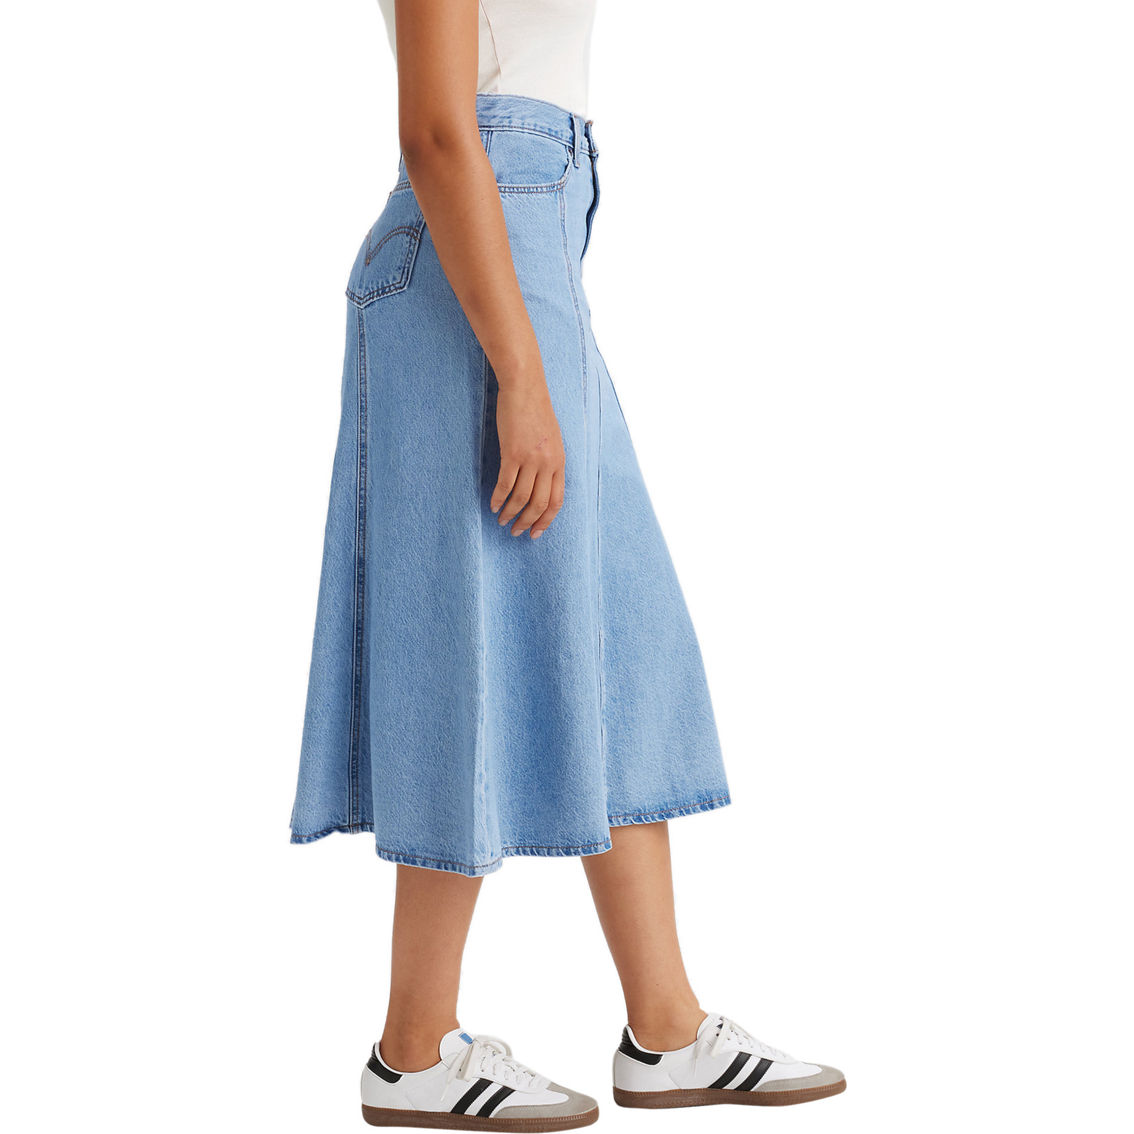 Levi's Fit and Flare Skirt - Image 3 of 3